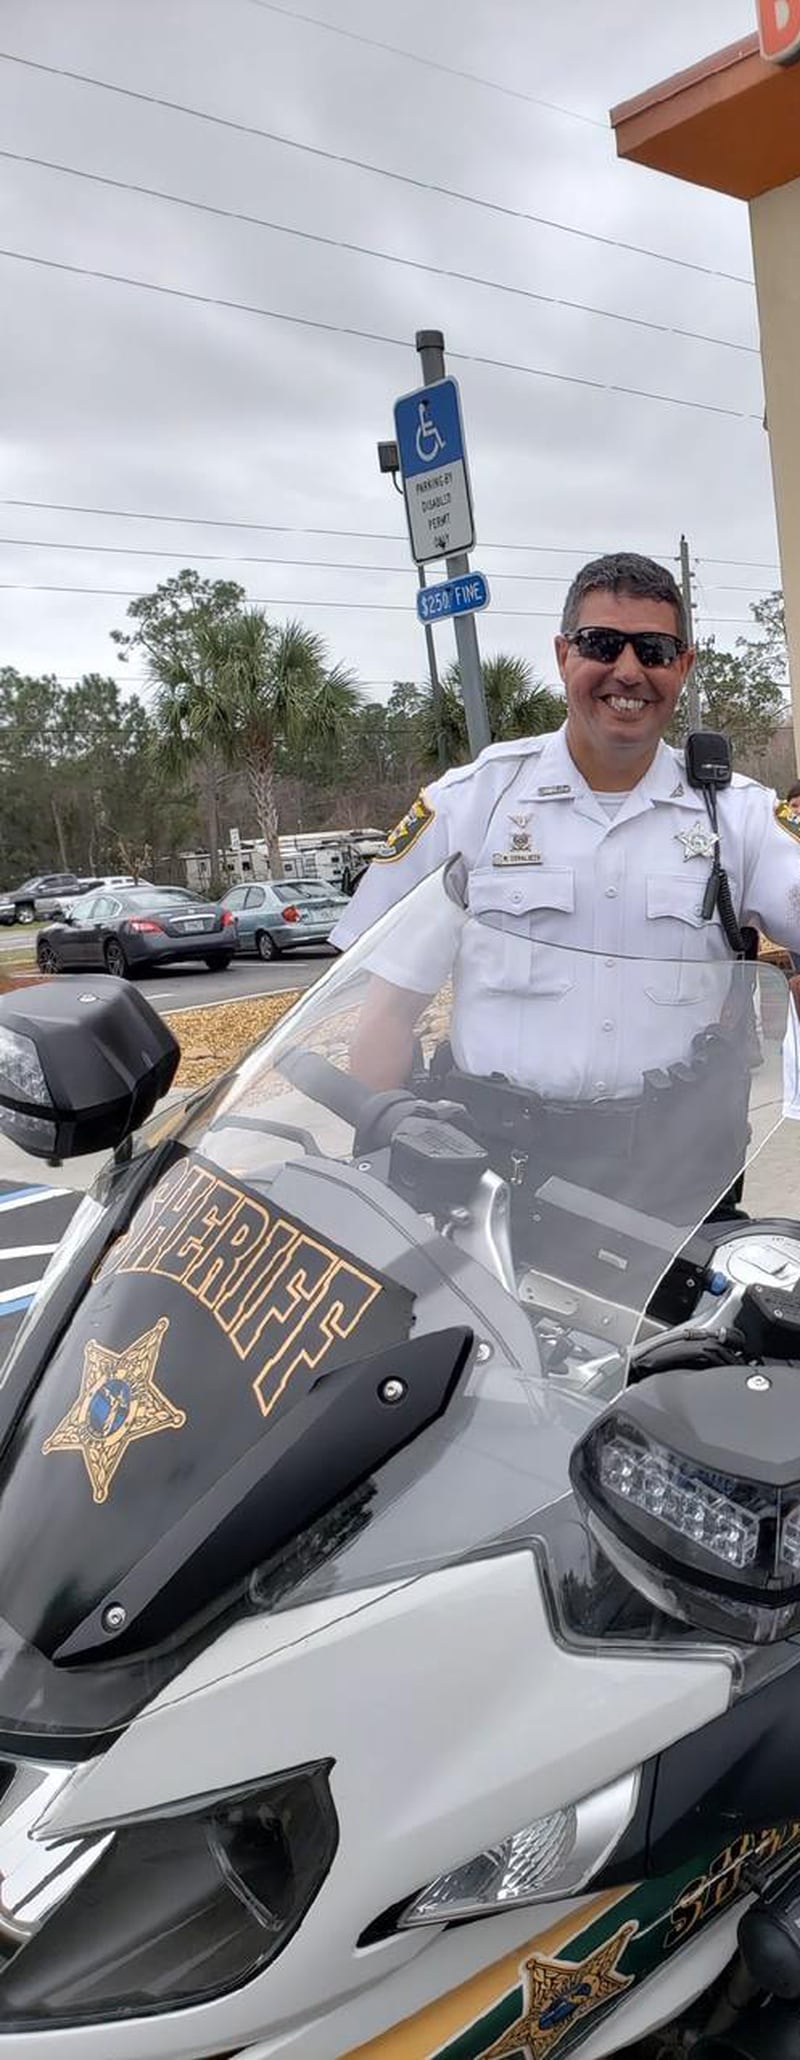 The deputy, 55-year-old Michael Coraluzzo, has been employed with SJSO for seven years.